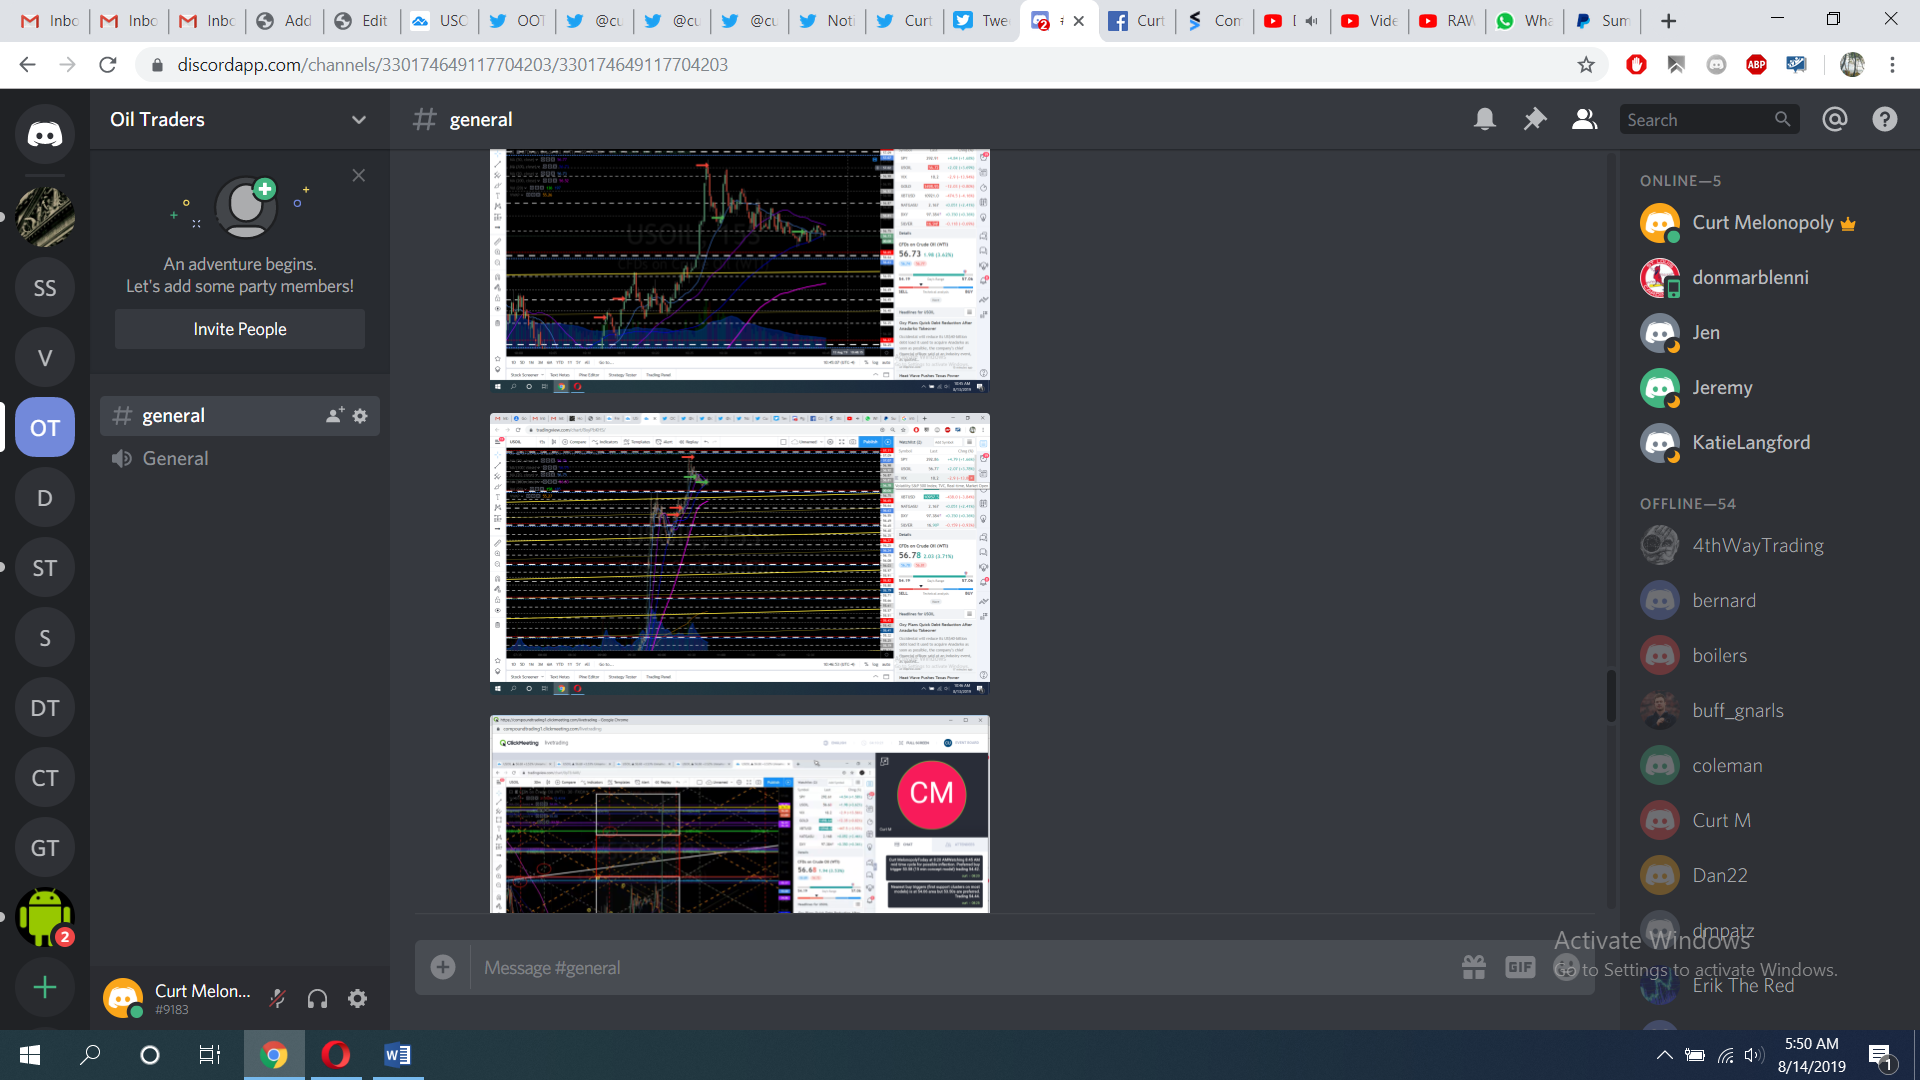 oil trading room, alerts, charts